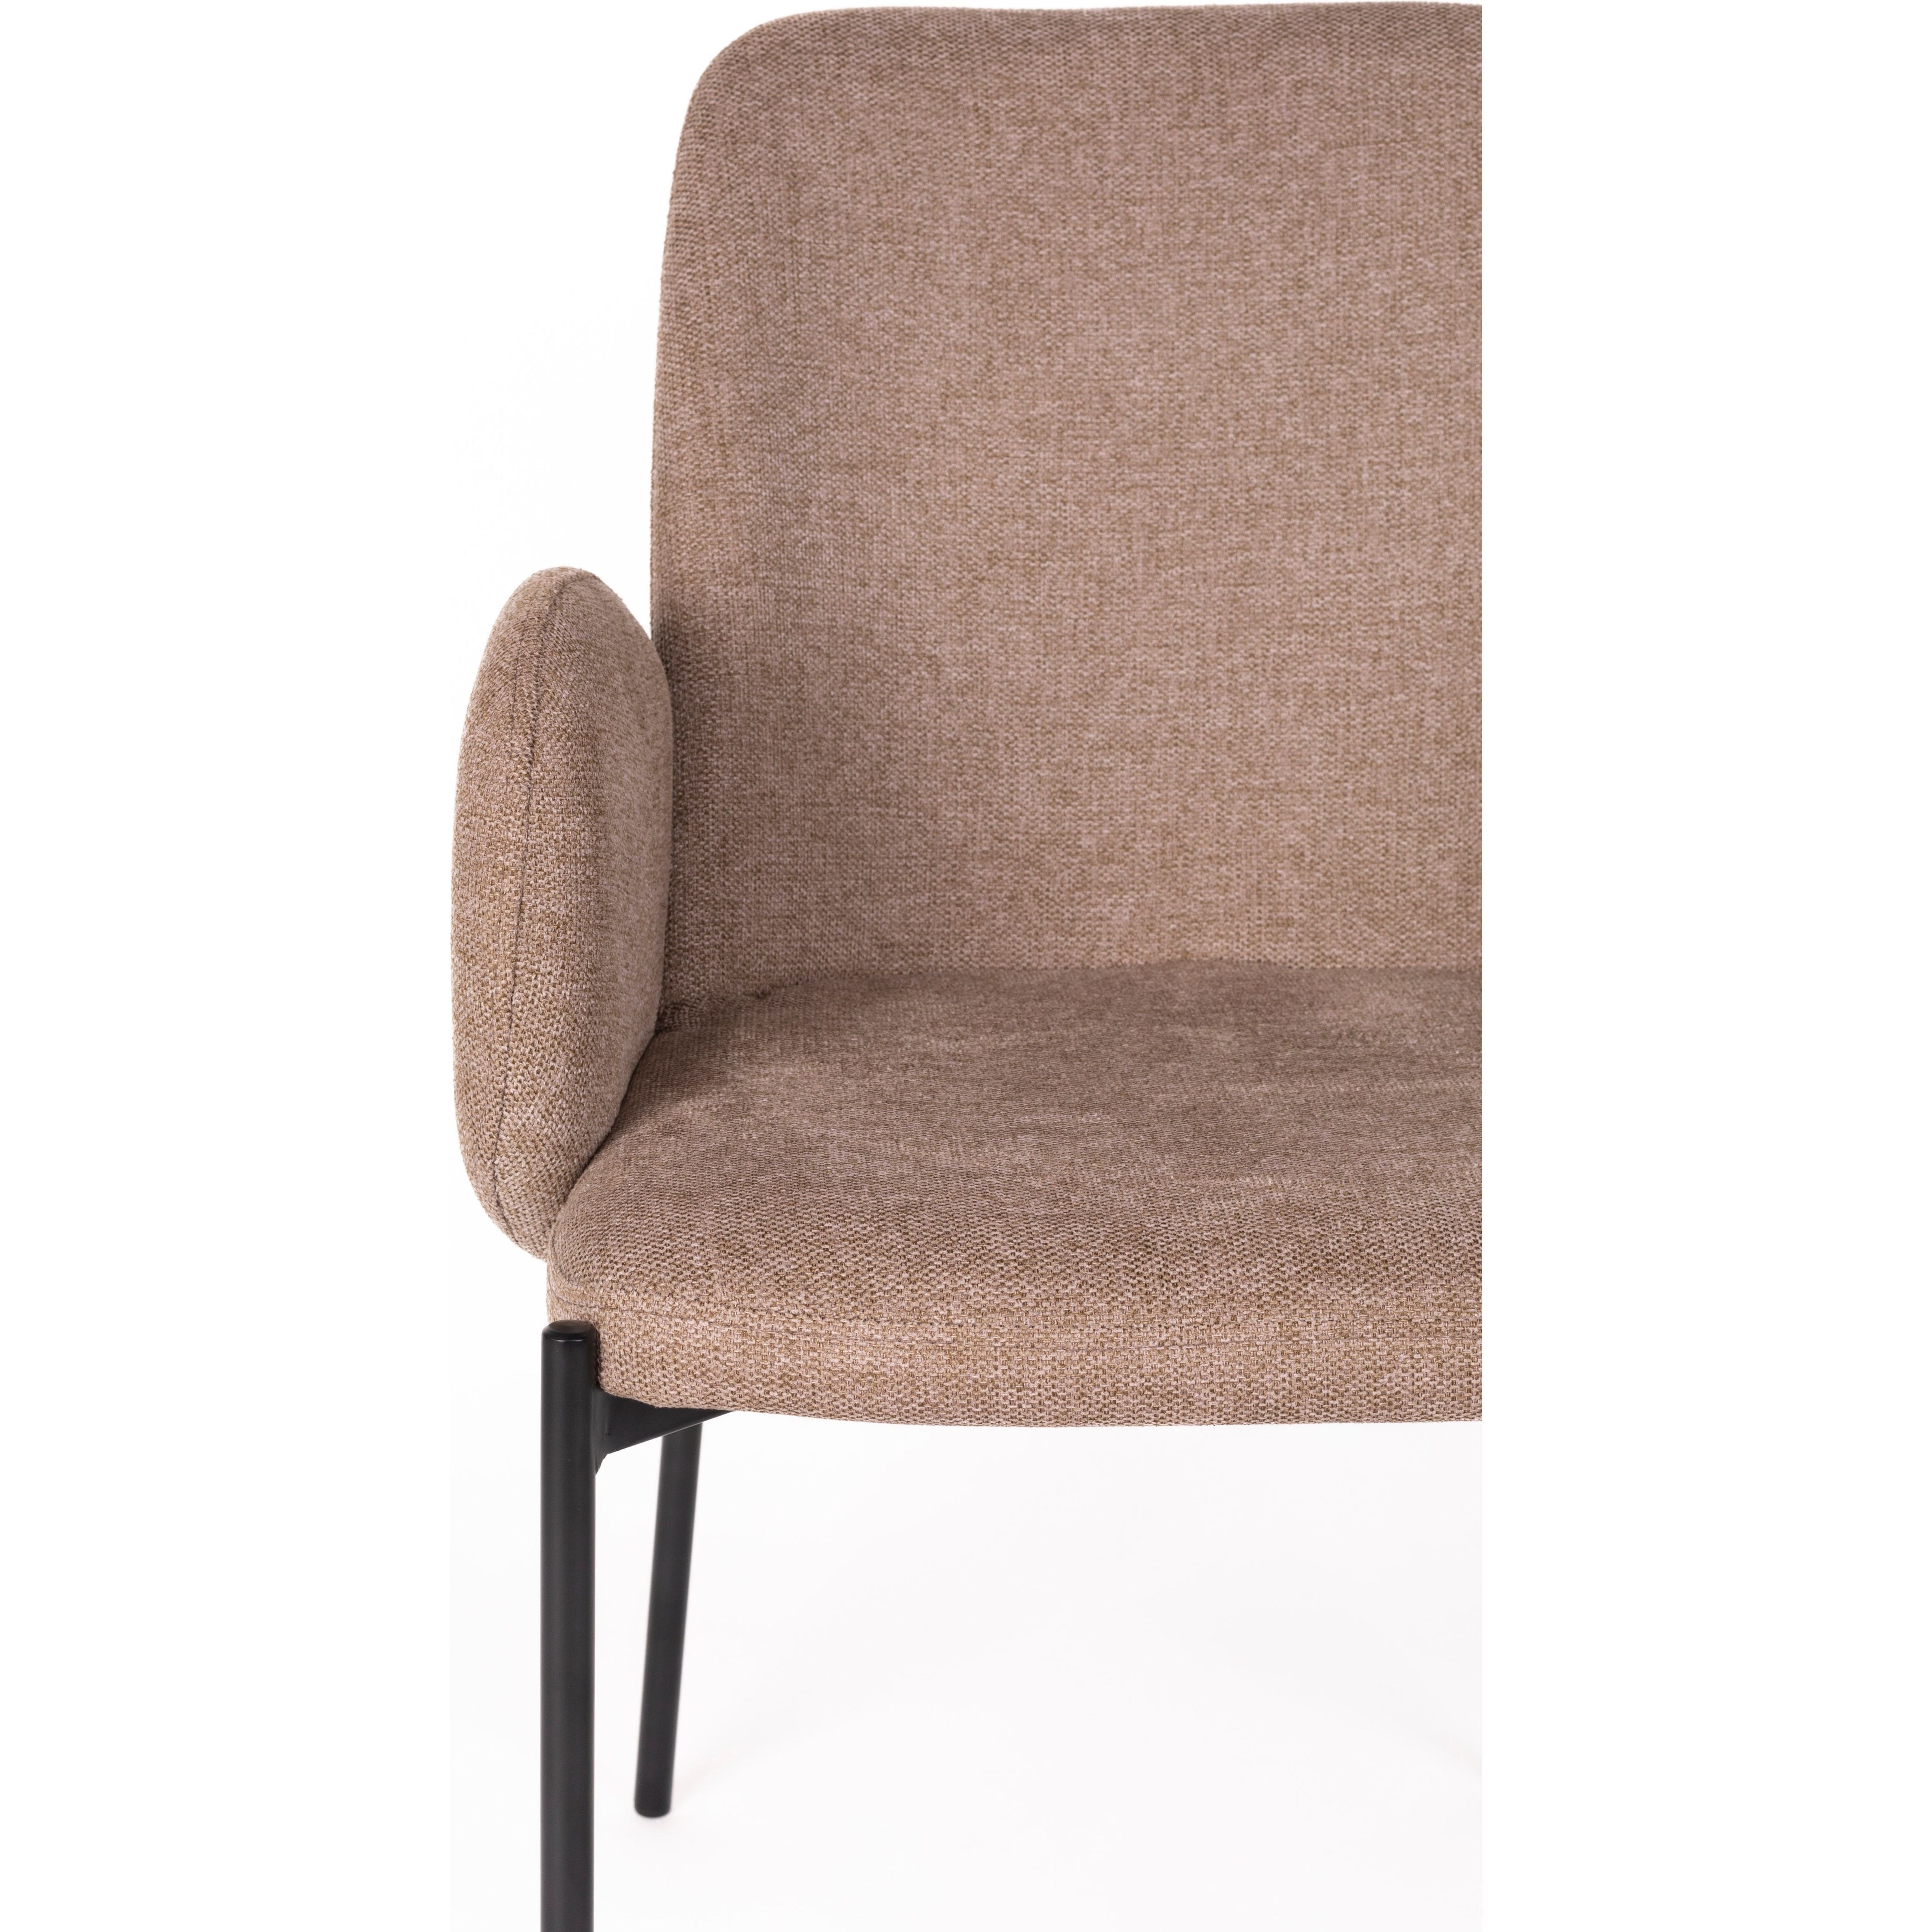 Chair tjarda brown | 2 pieces